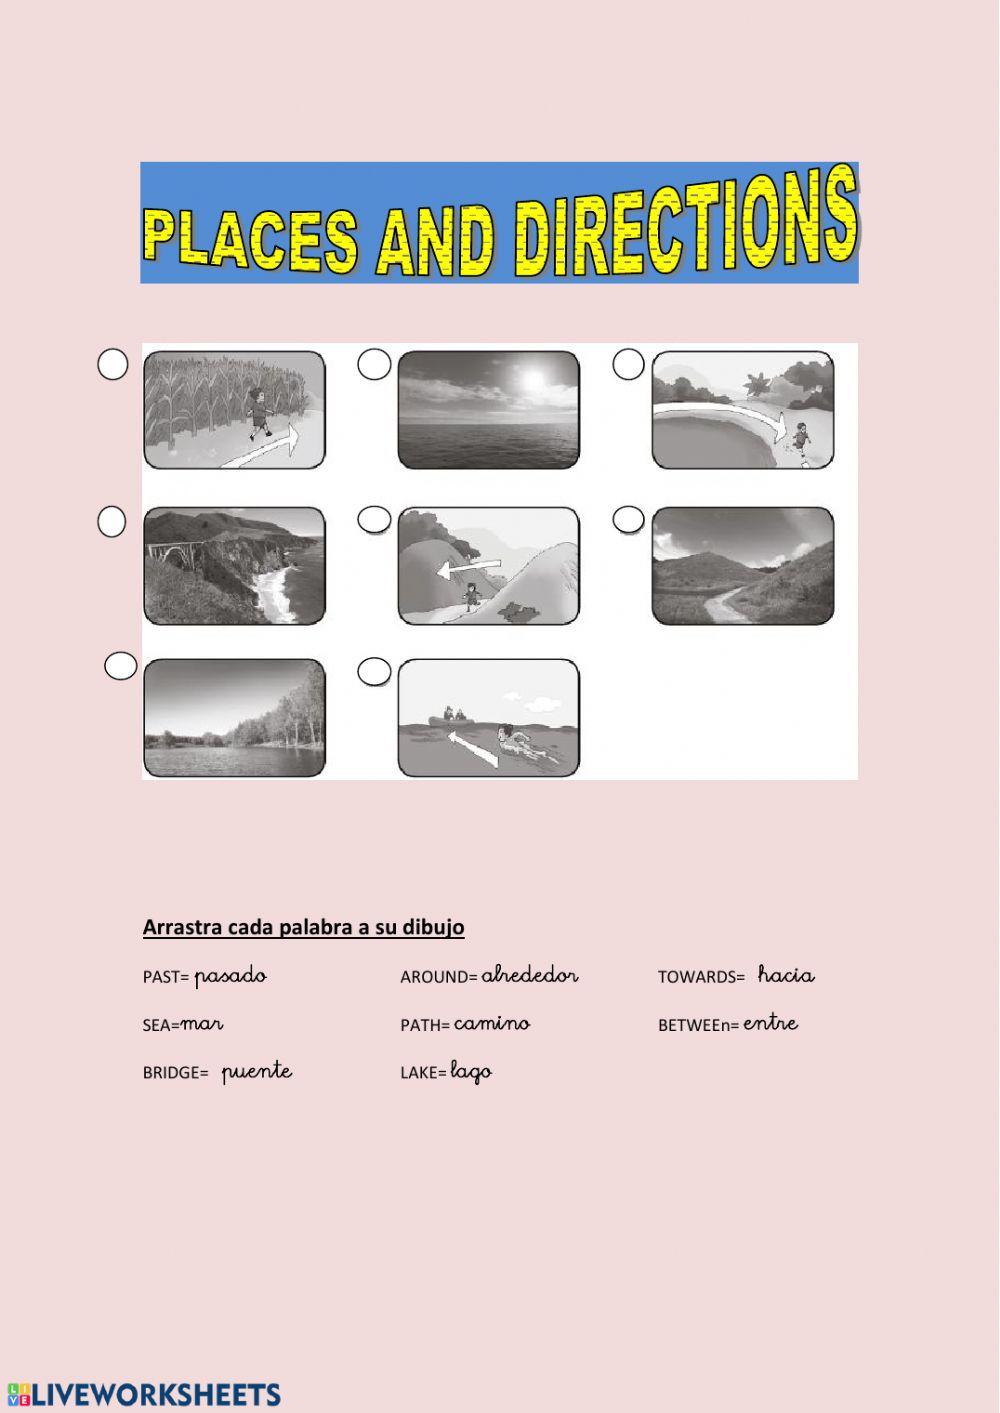 PLACES AND DIRECTIONS